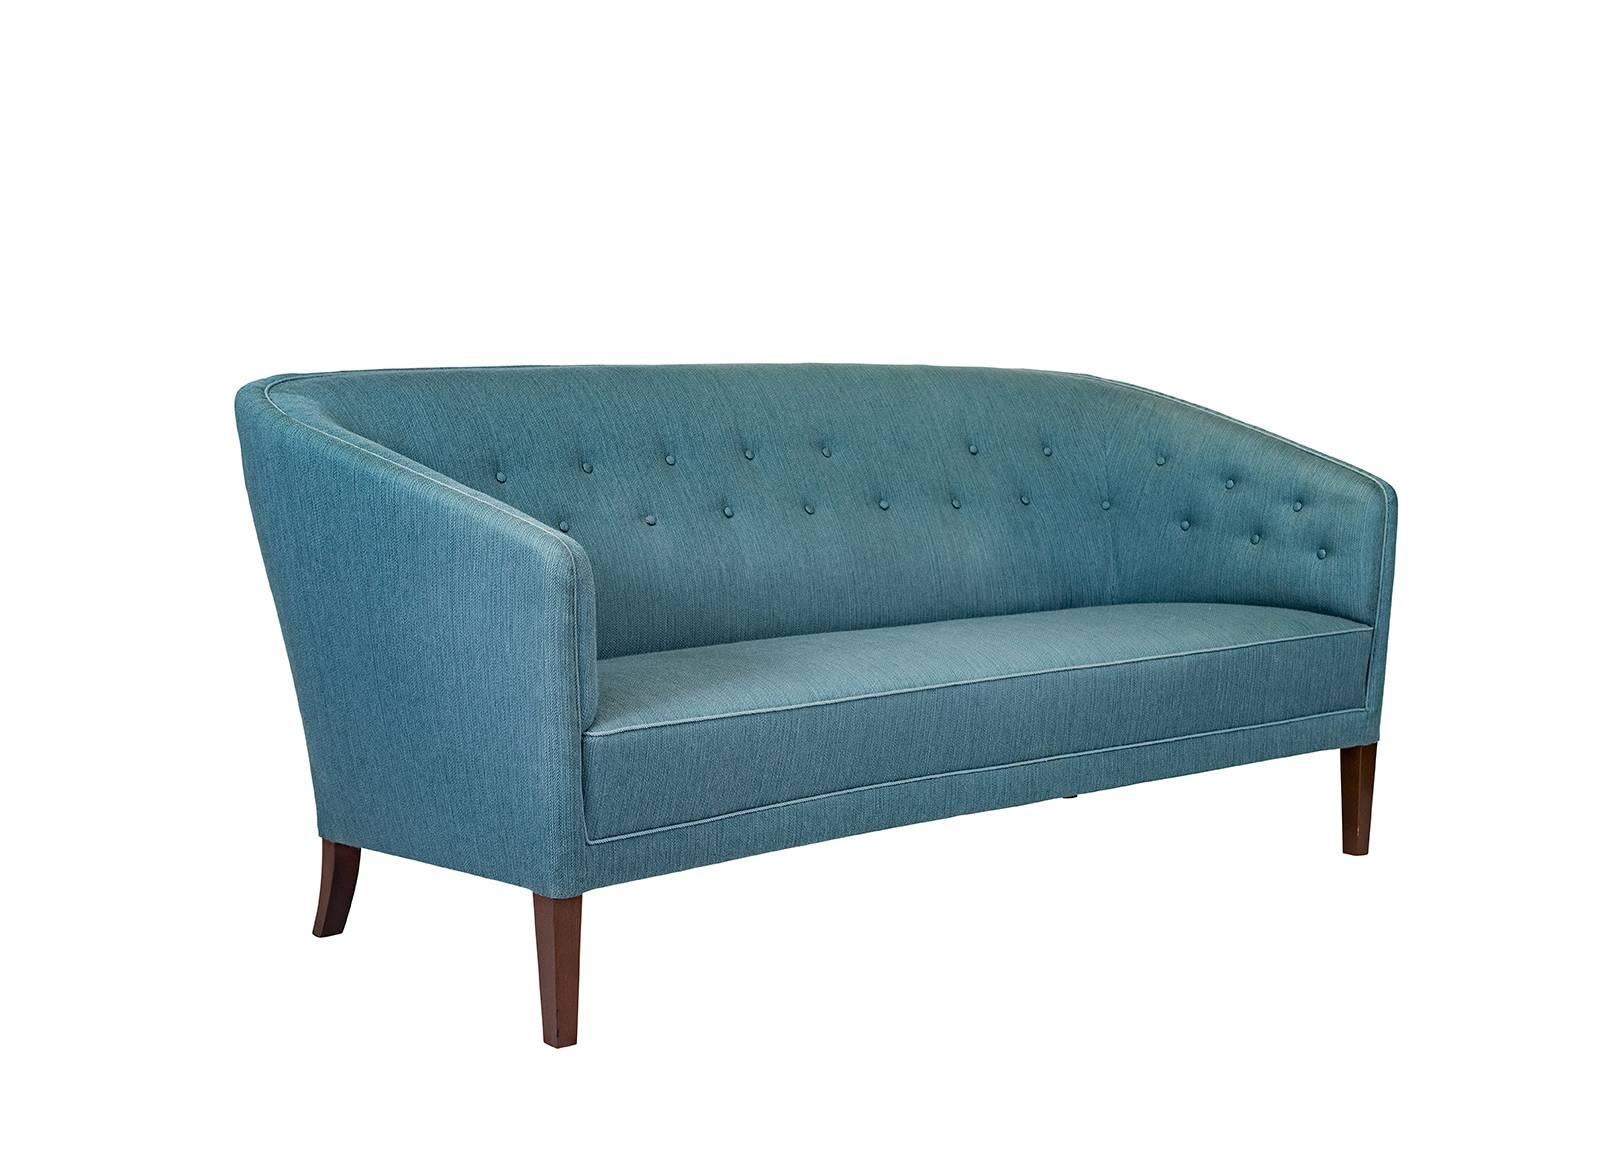 Ludvig Pontoppidan sofa from the 1940s.   Store formerly known as ARTFUL DODGER INC 